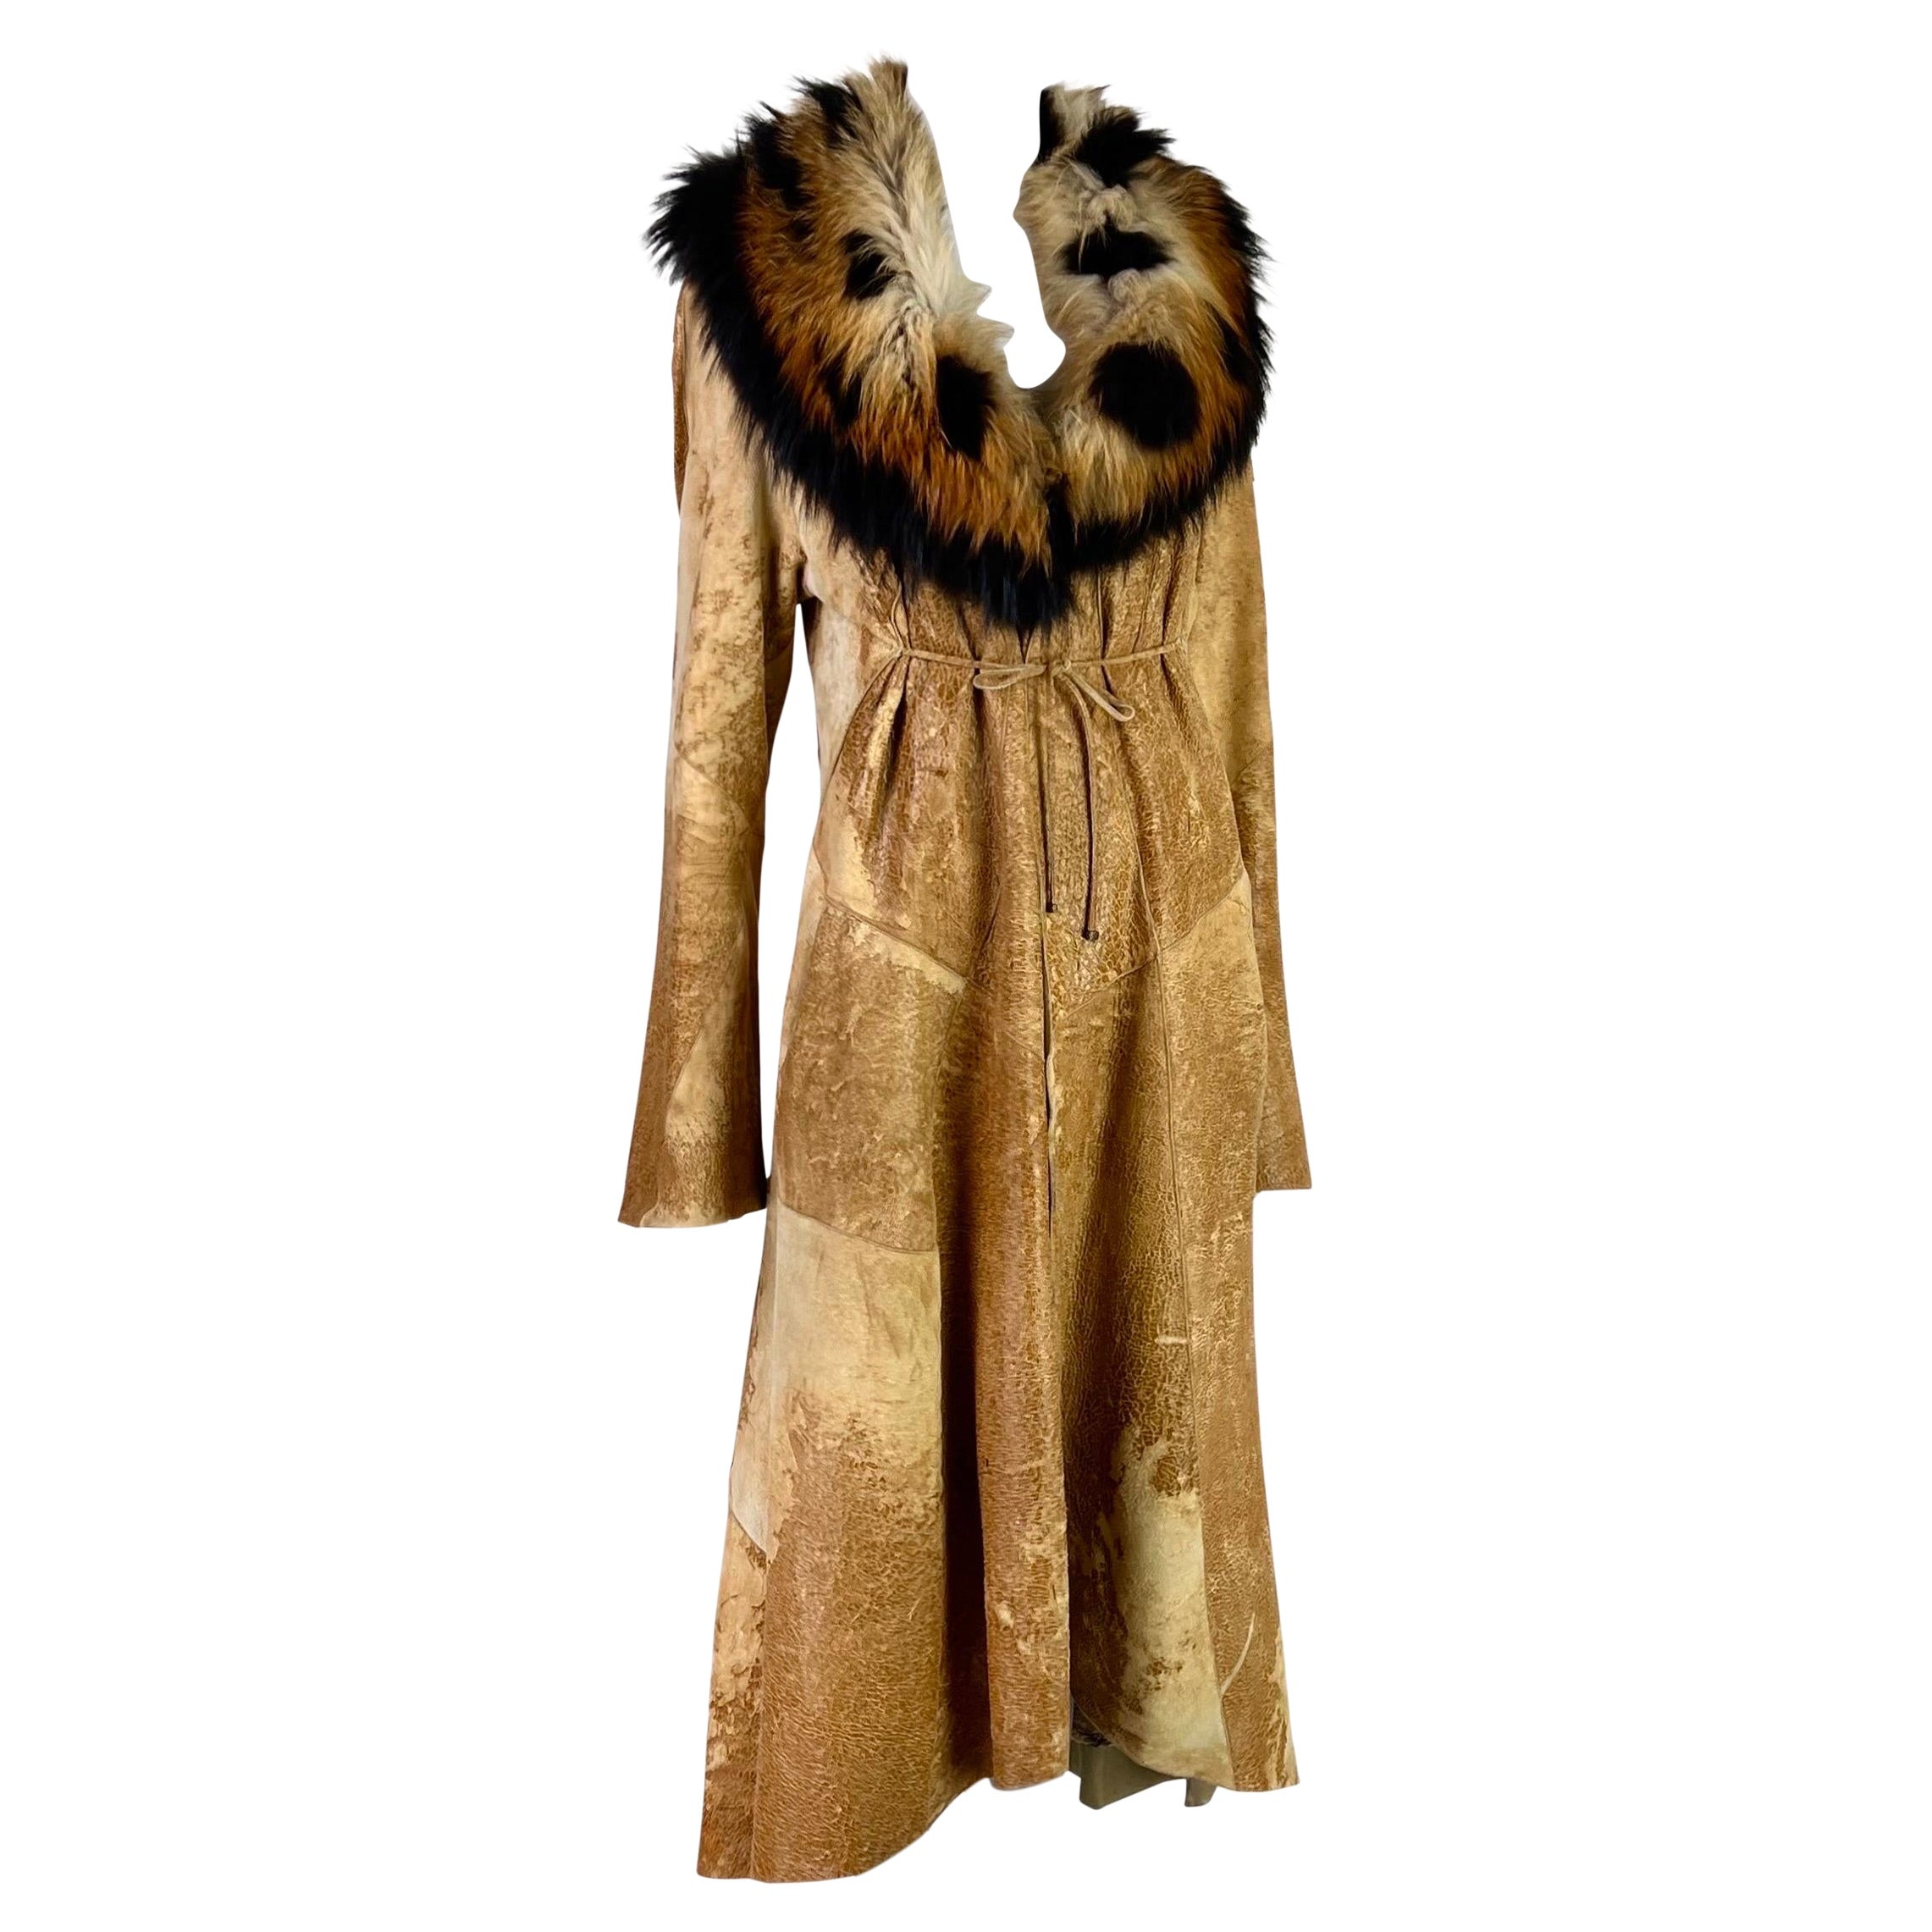 Roberto Cavalli Fall 2002 Leather Coat with Fox Fur For Sale